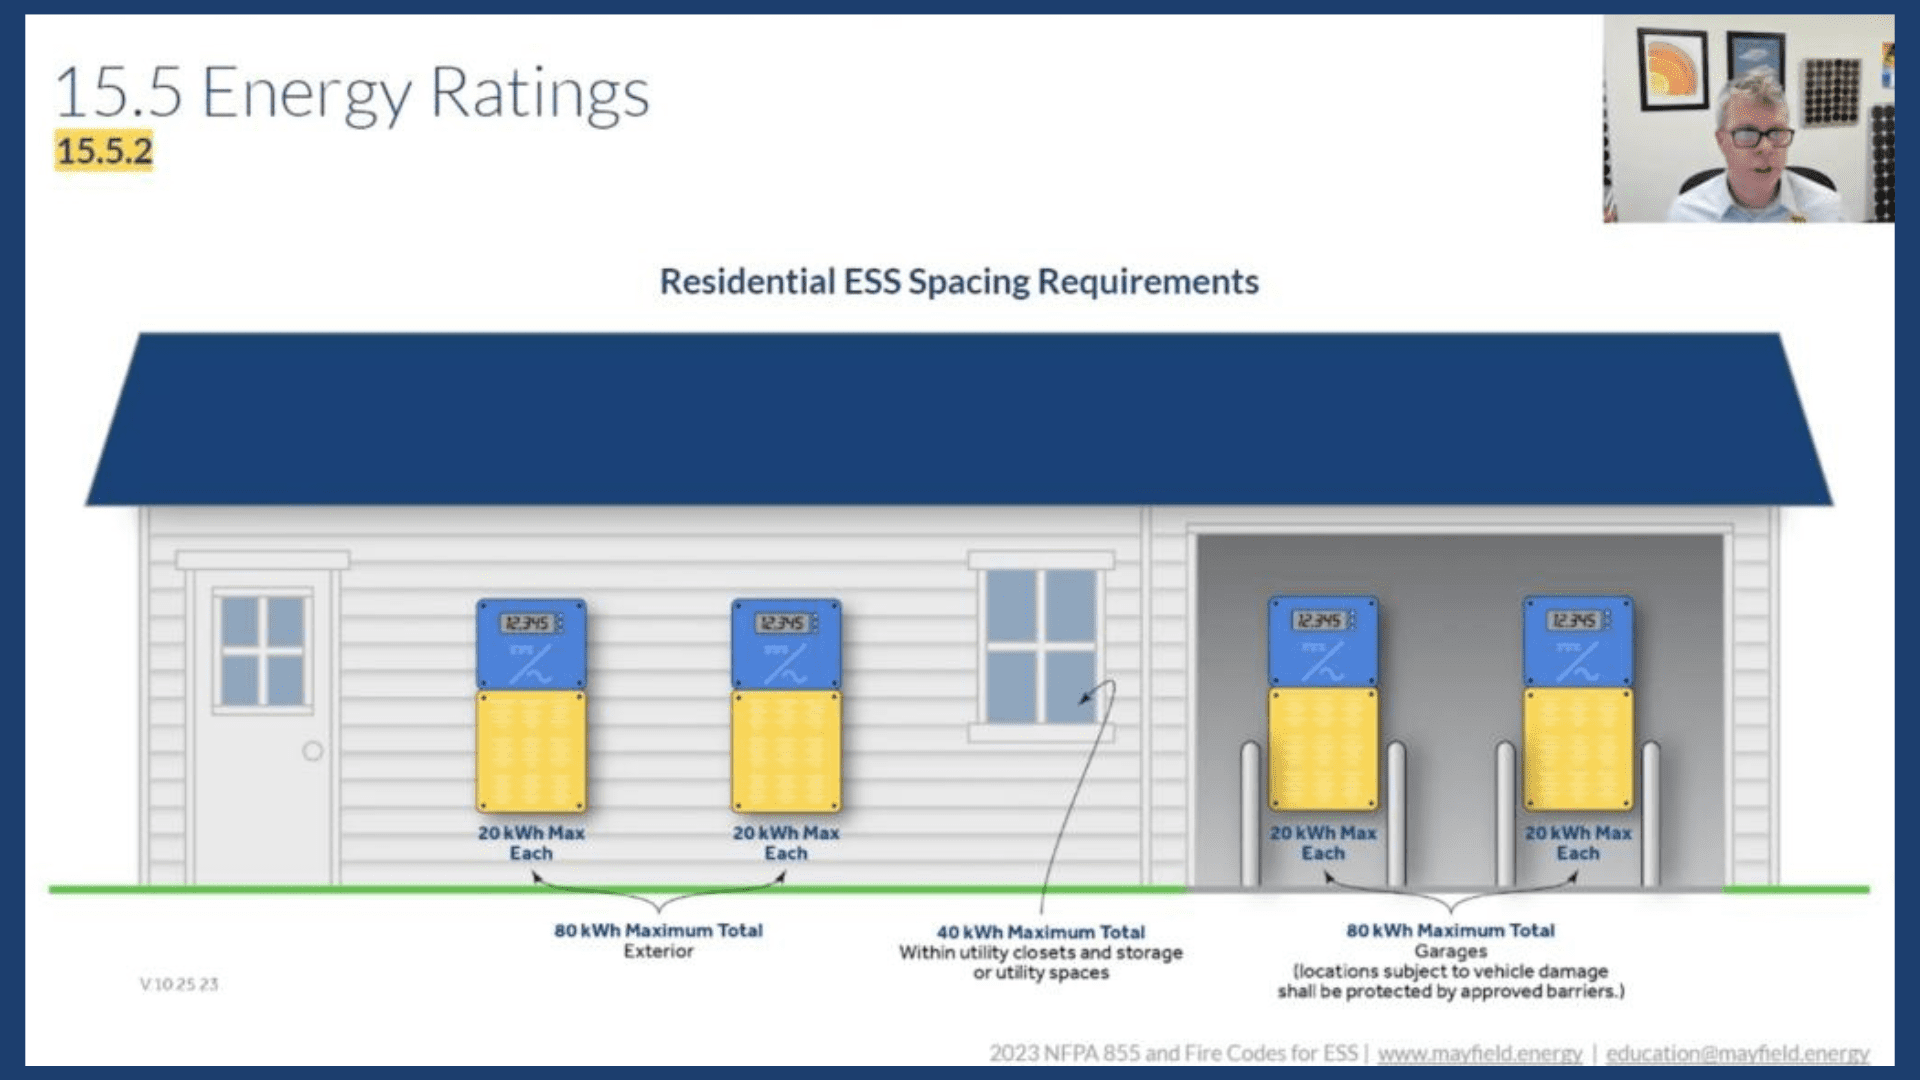 Residential ESS Spacing Requirements